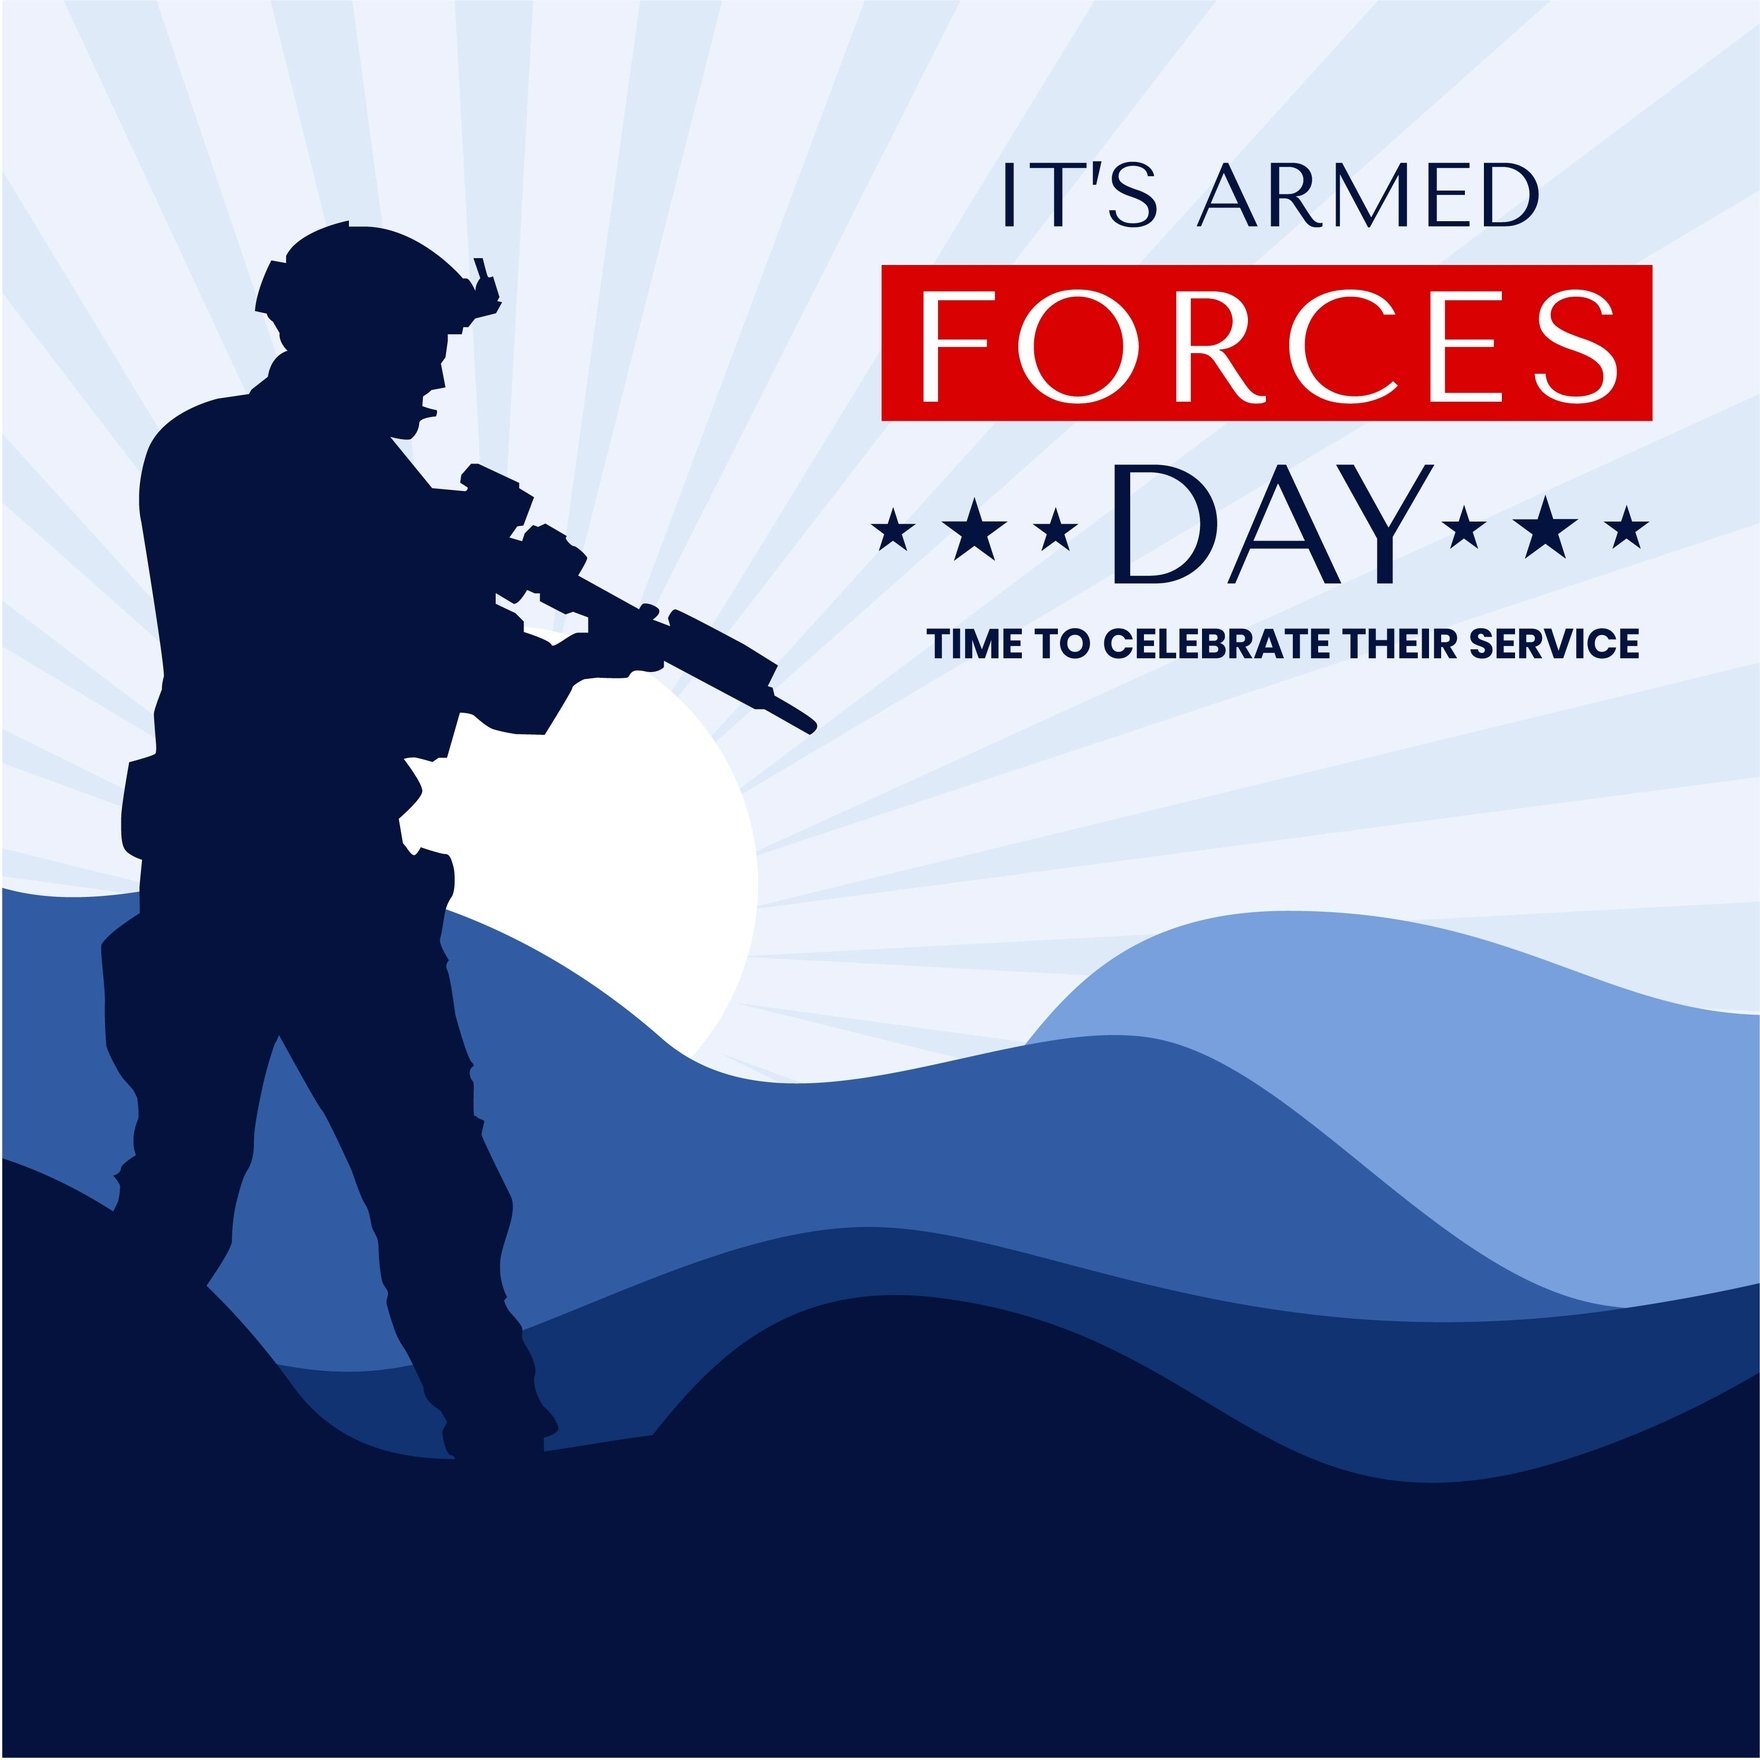 Armed Forces Day Whatsapp Post in Illustrator, PSD, EPS, SVG, PNG, JPEG